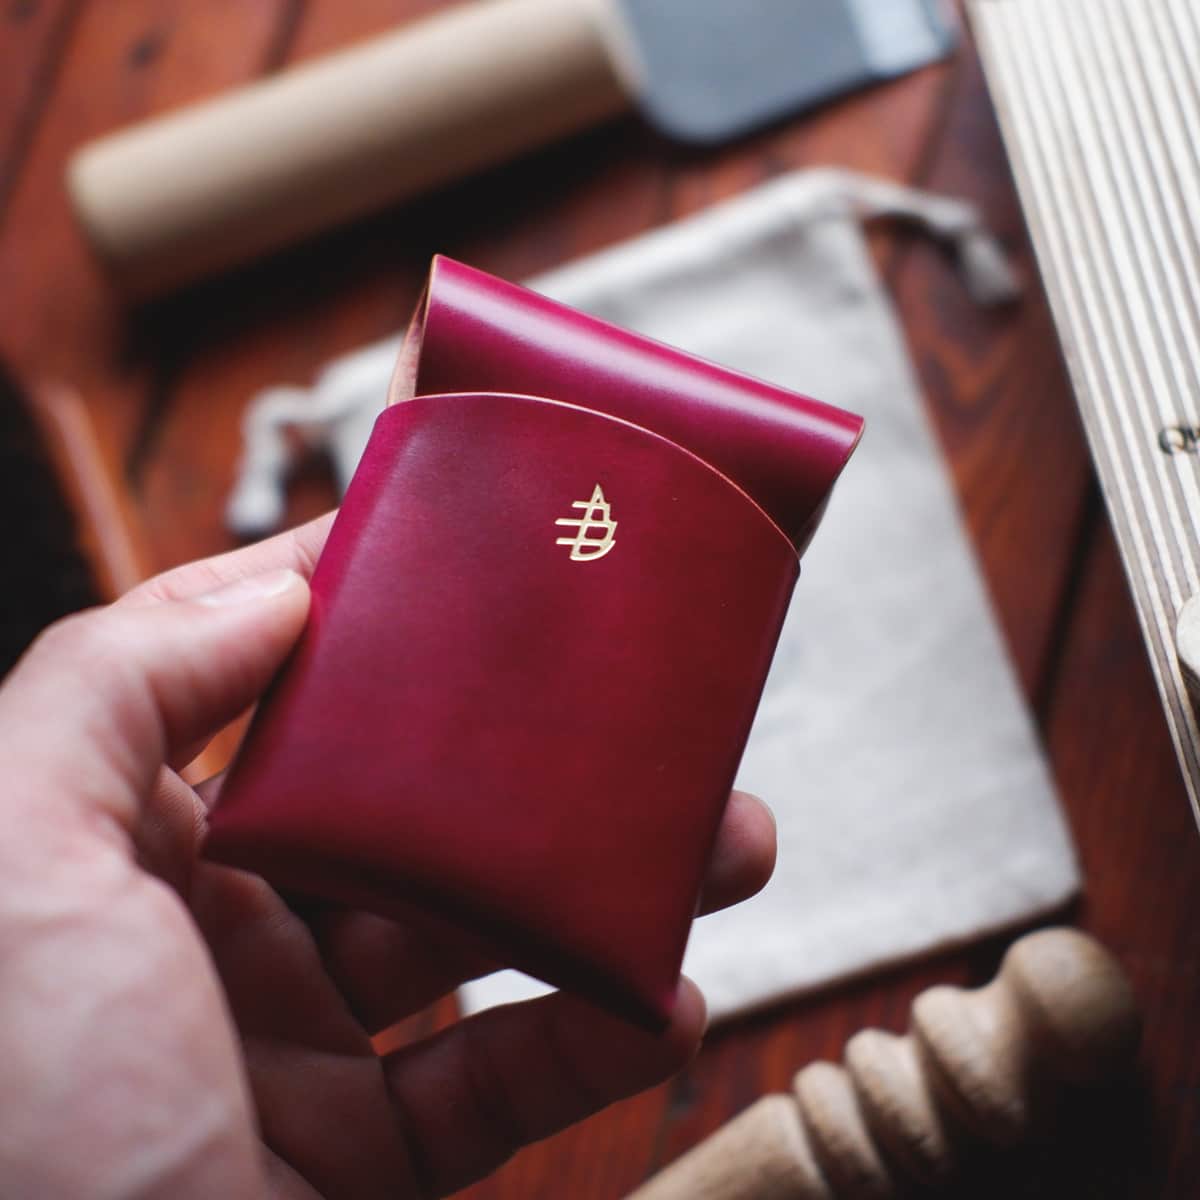 The Mini Lodgepole Stitchless Wallet in Pink Marbled Shell Cordovan leather held in hand